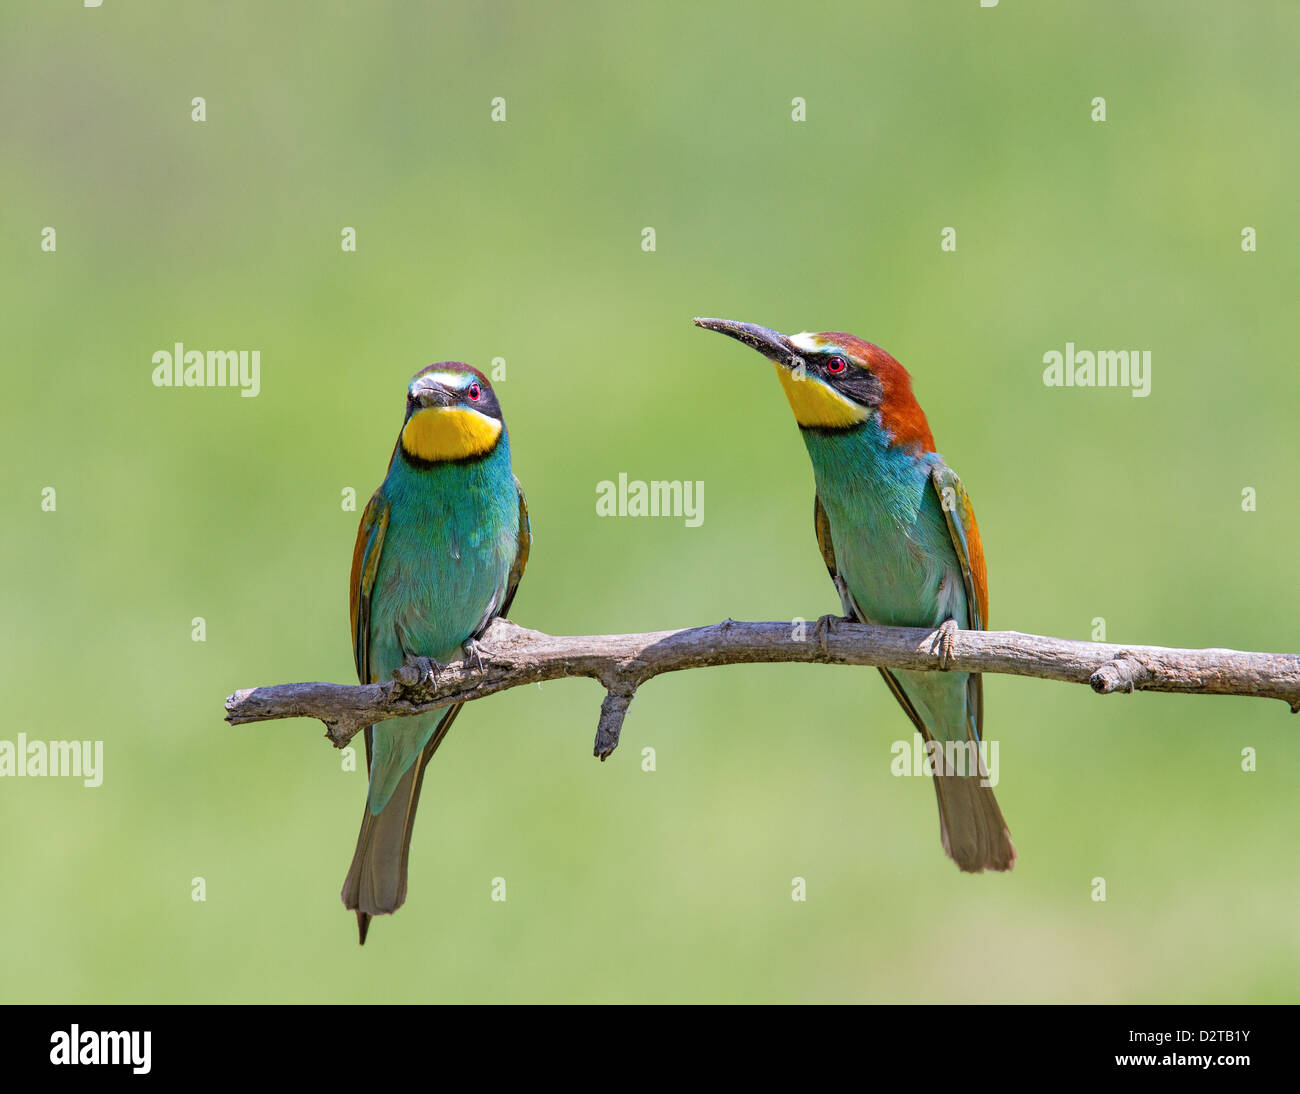 A pair of European bee eaters (Merops apiaster) perched on a branch, soft-focus green foliage background Stock Photo